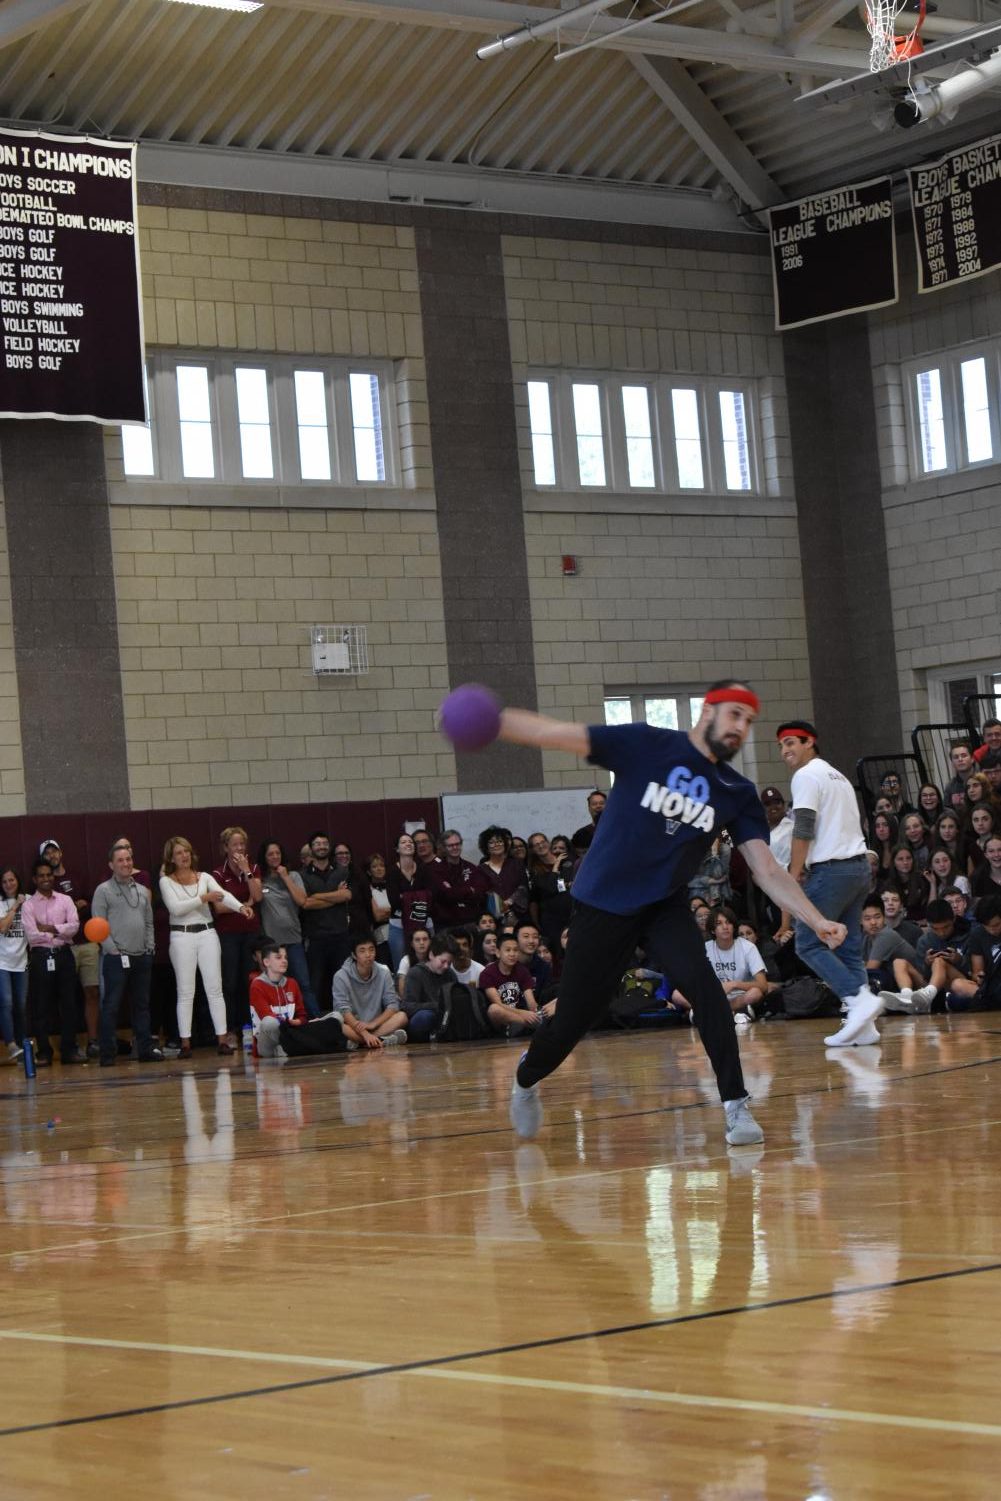 Highlights+from+the+Fall+Pep+Rally